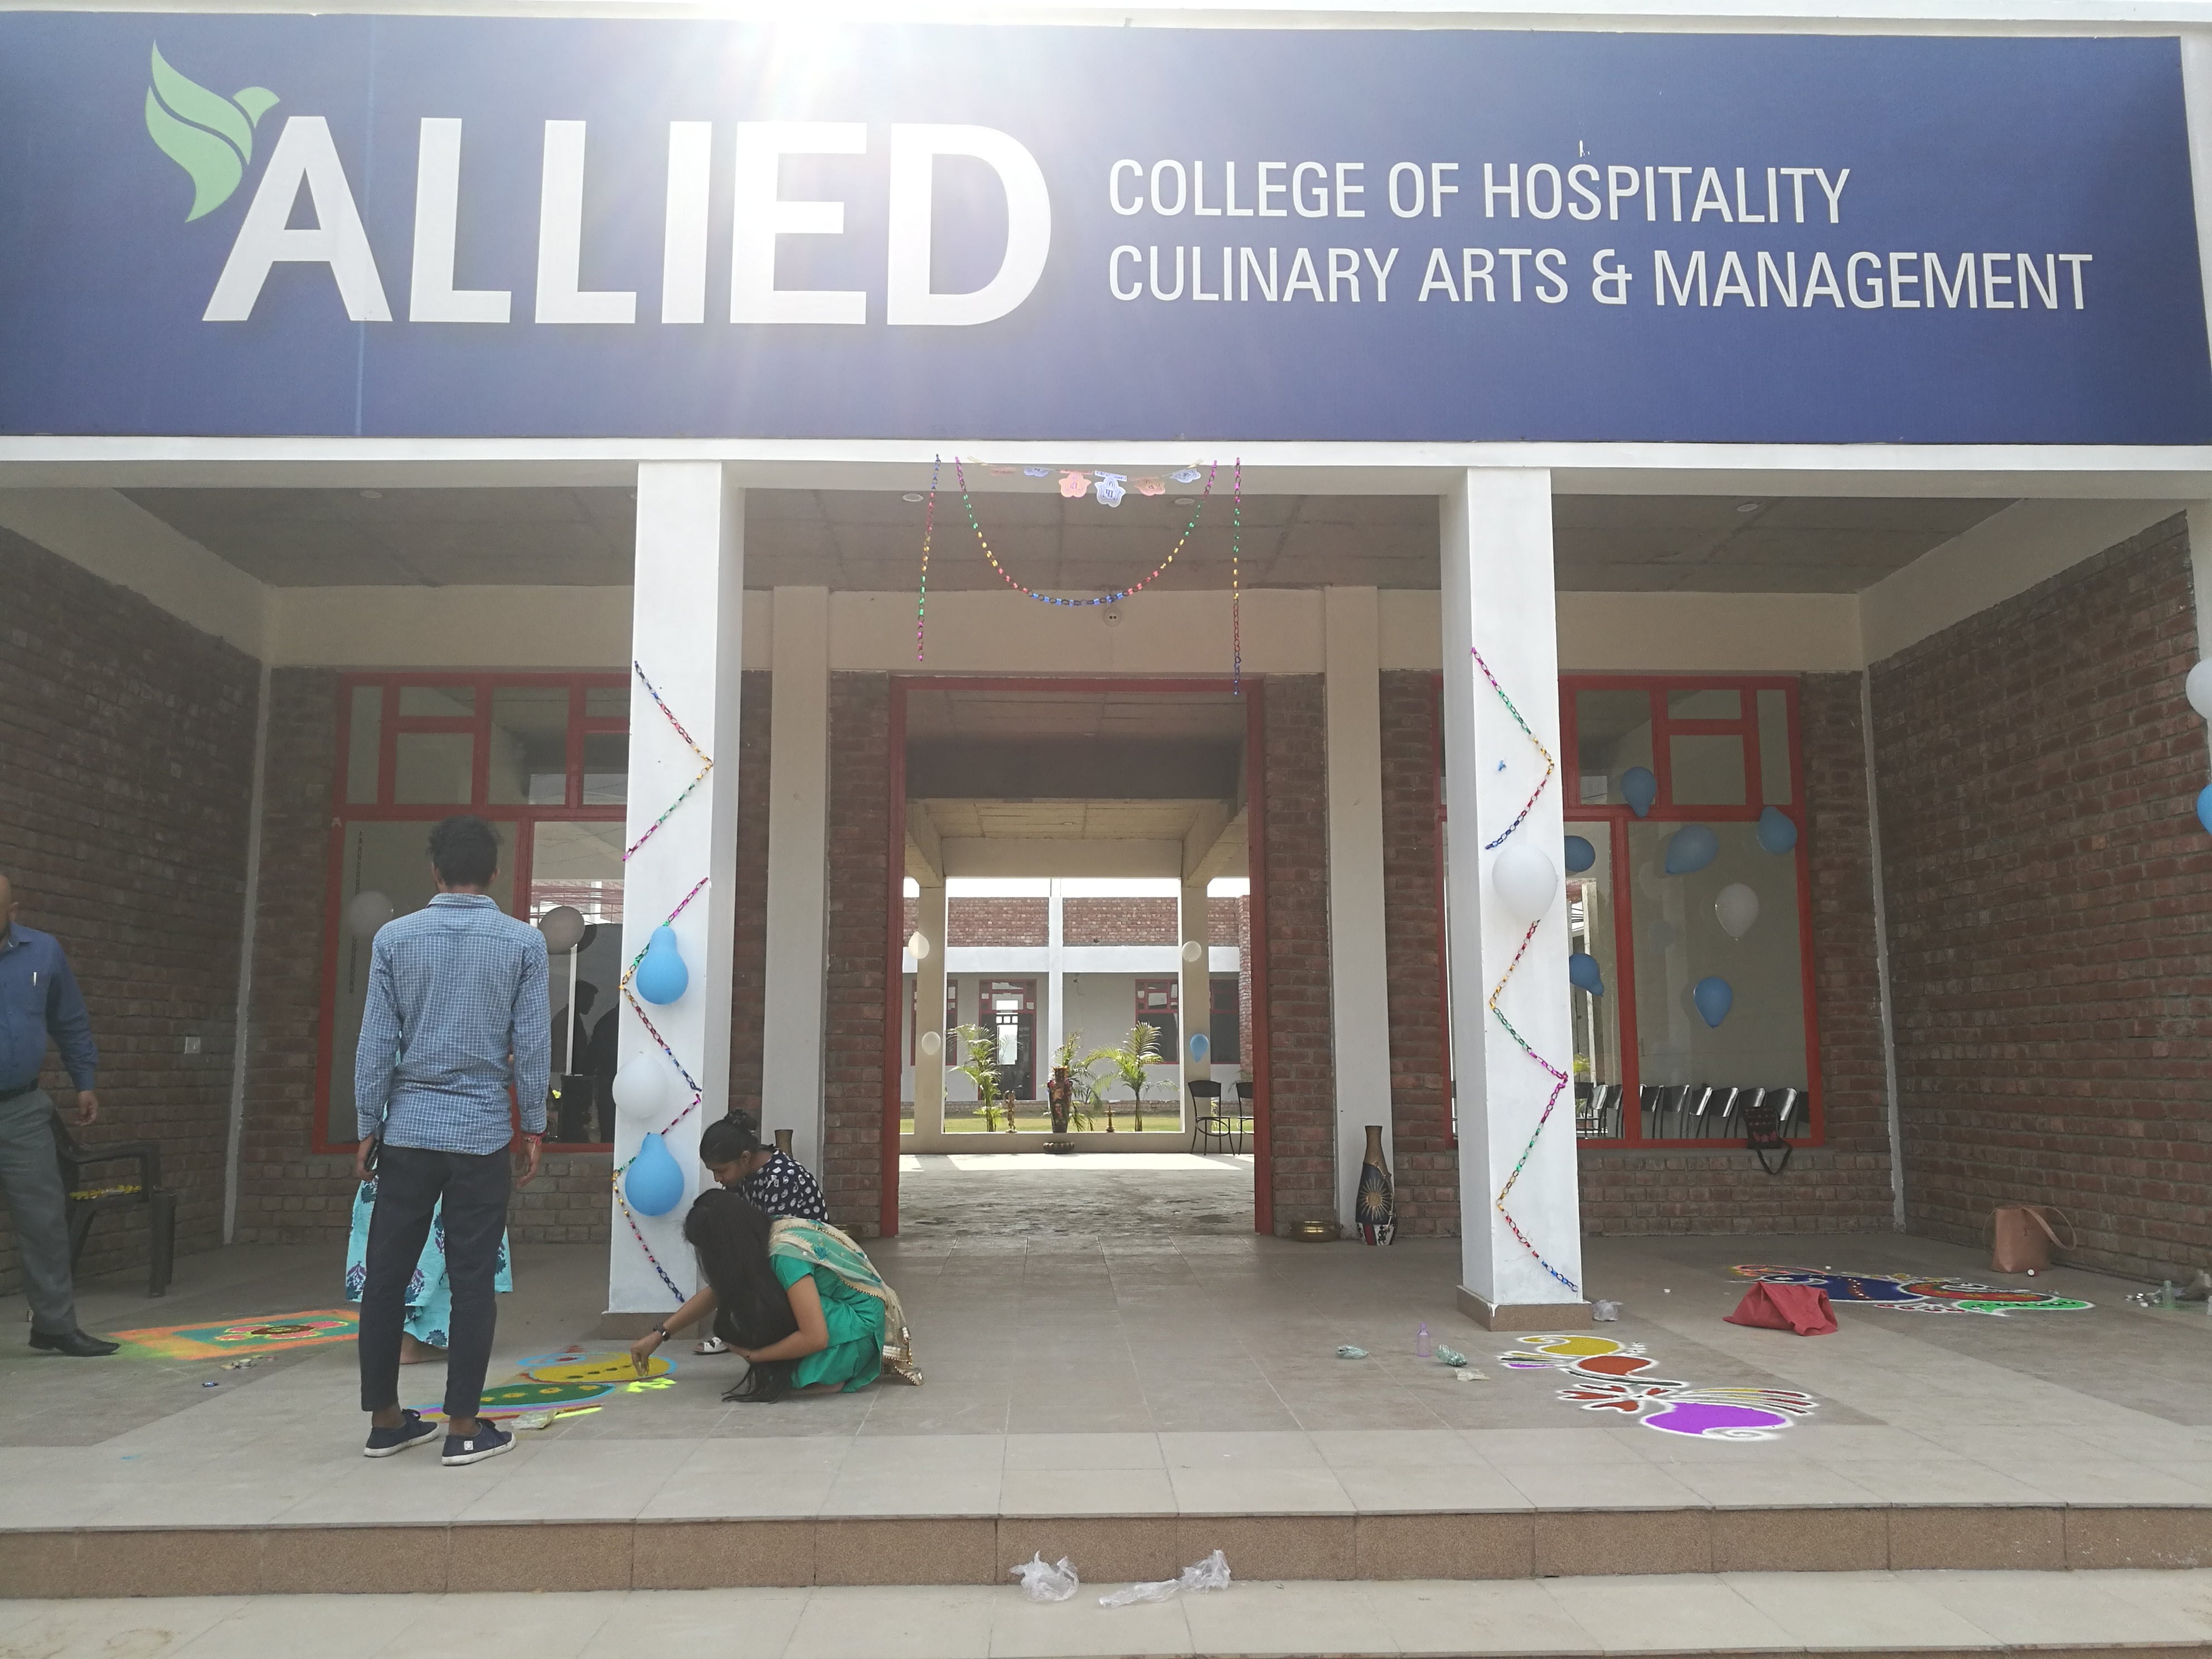 Allied College of Hospitality Culinary Arts & Management